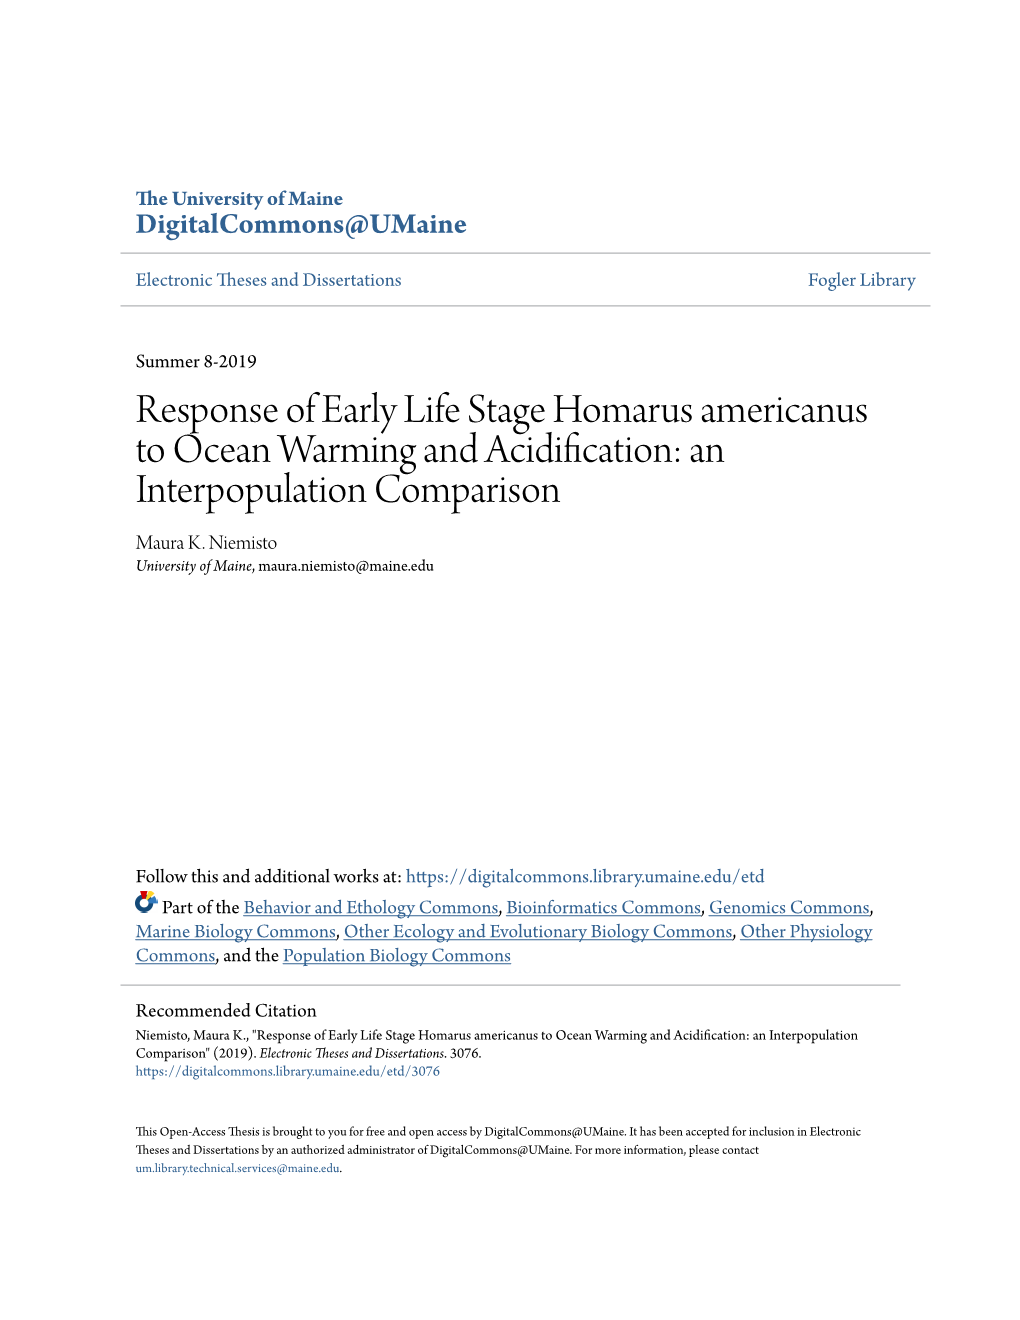 Response of Early Life Stage Homarus Americanus to Ocean Warming and Acidification: an Interpopulation Comparison Maura K